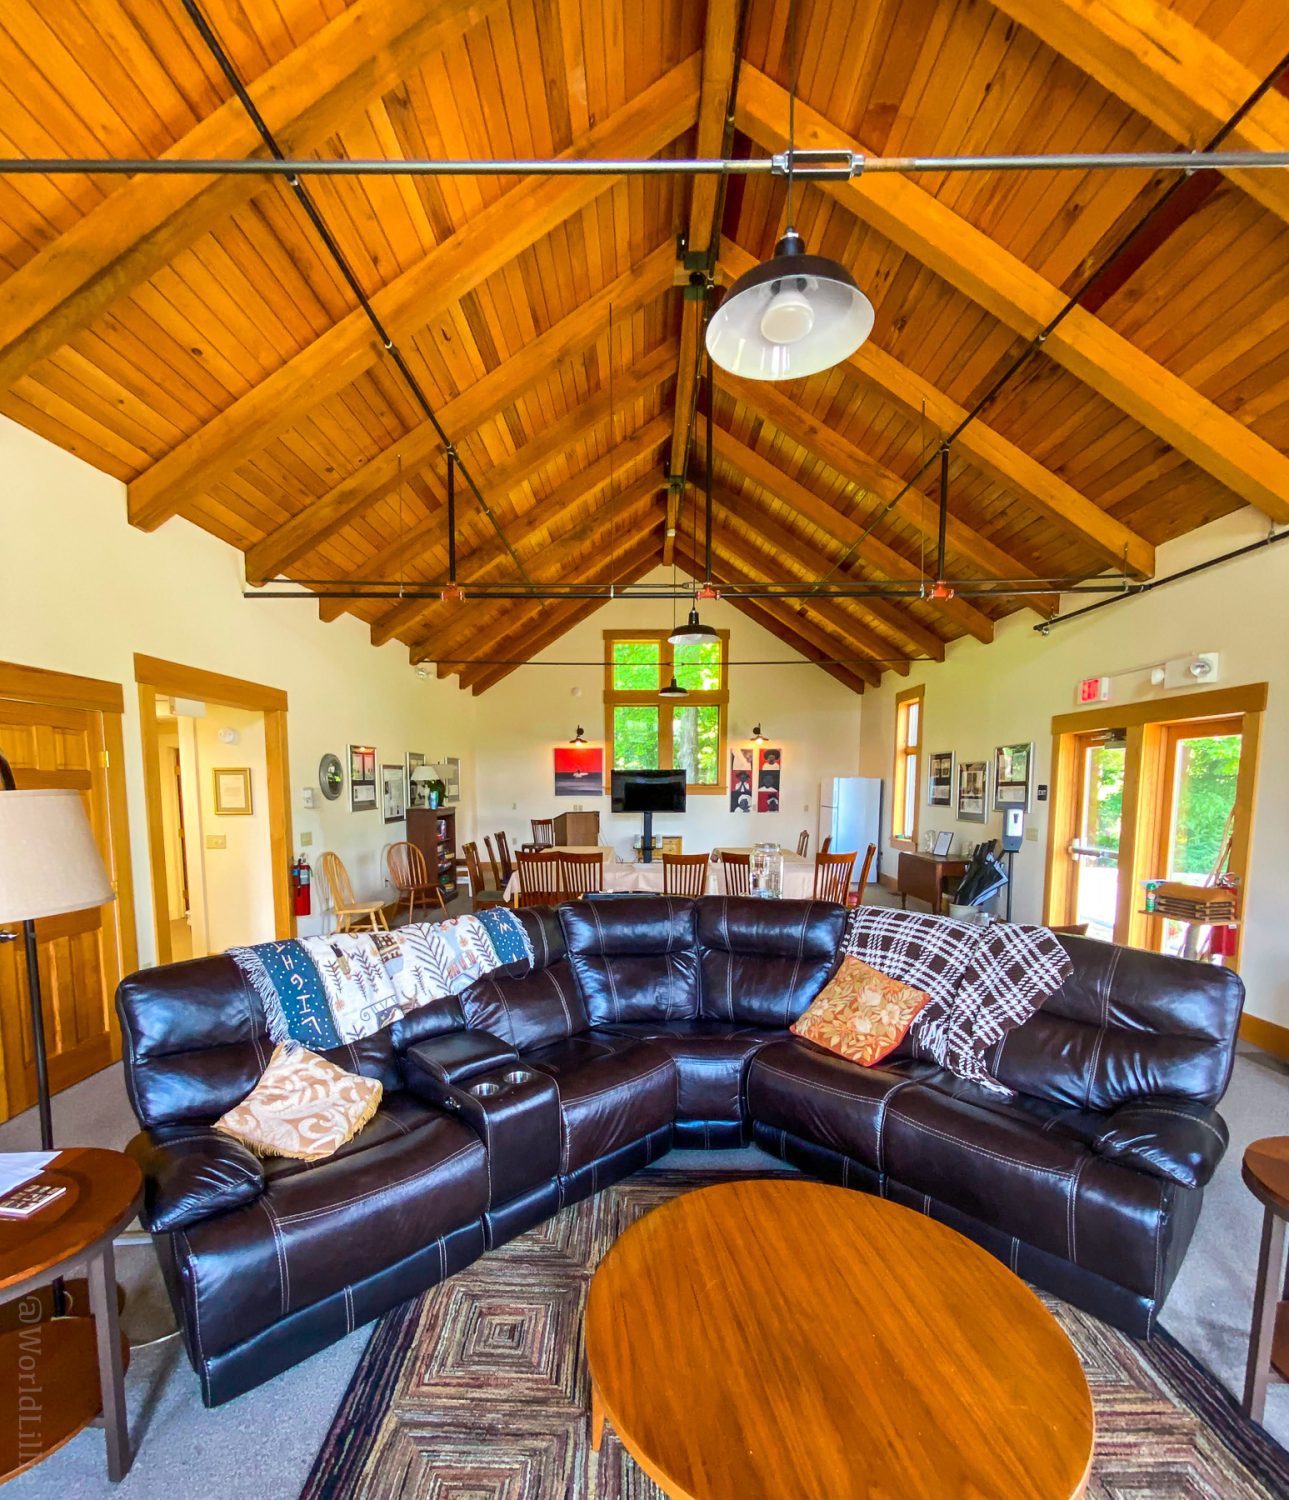 The common room in the Lodge at Highlights.